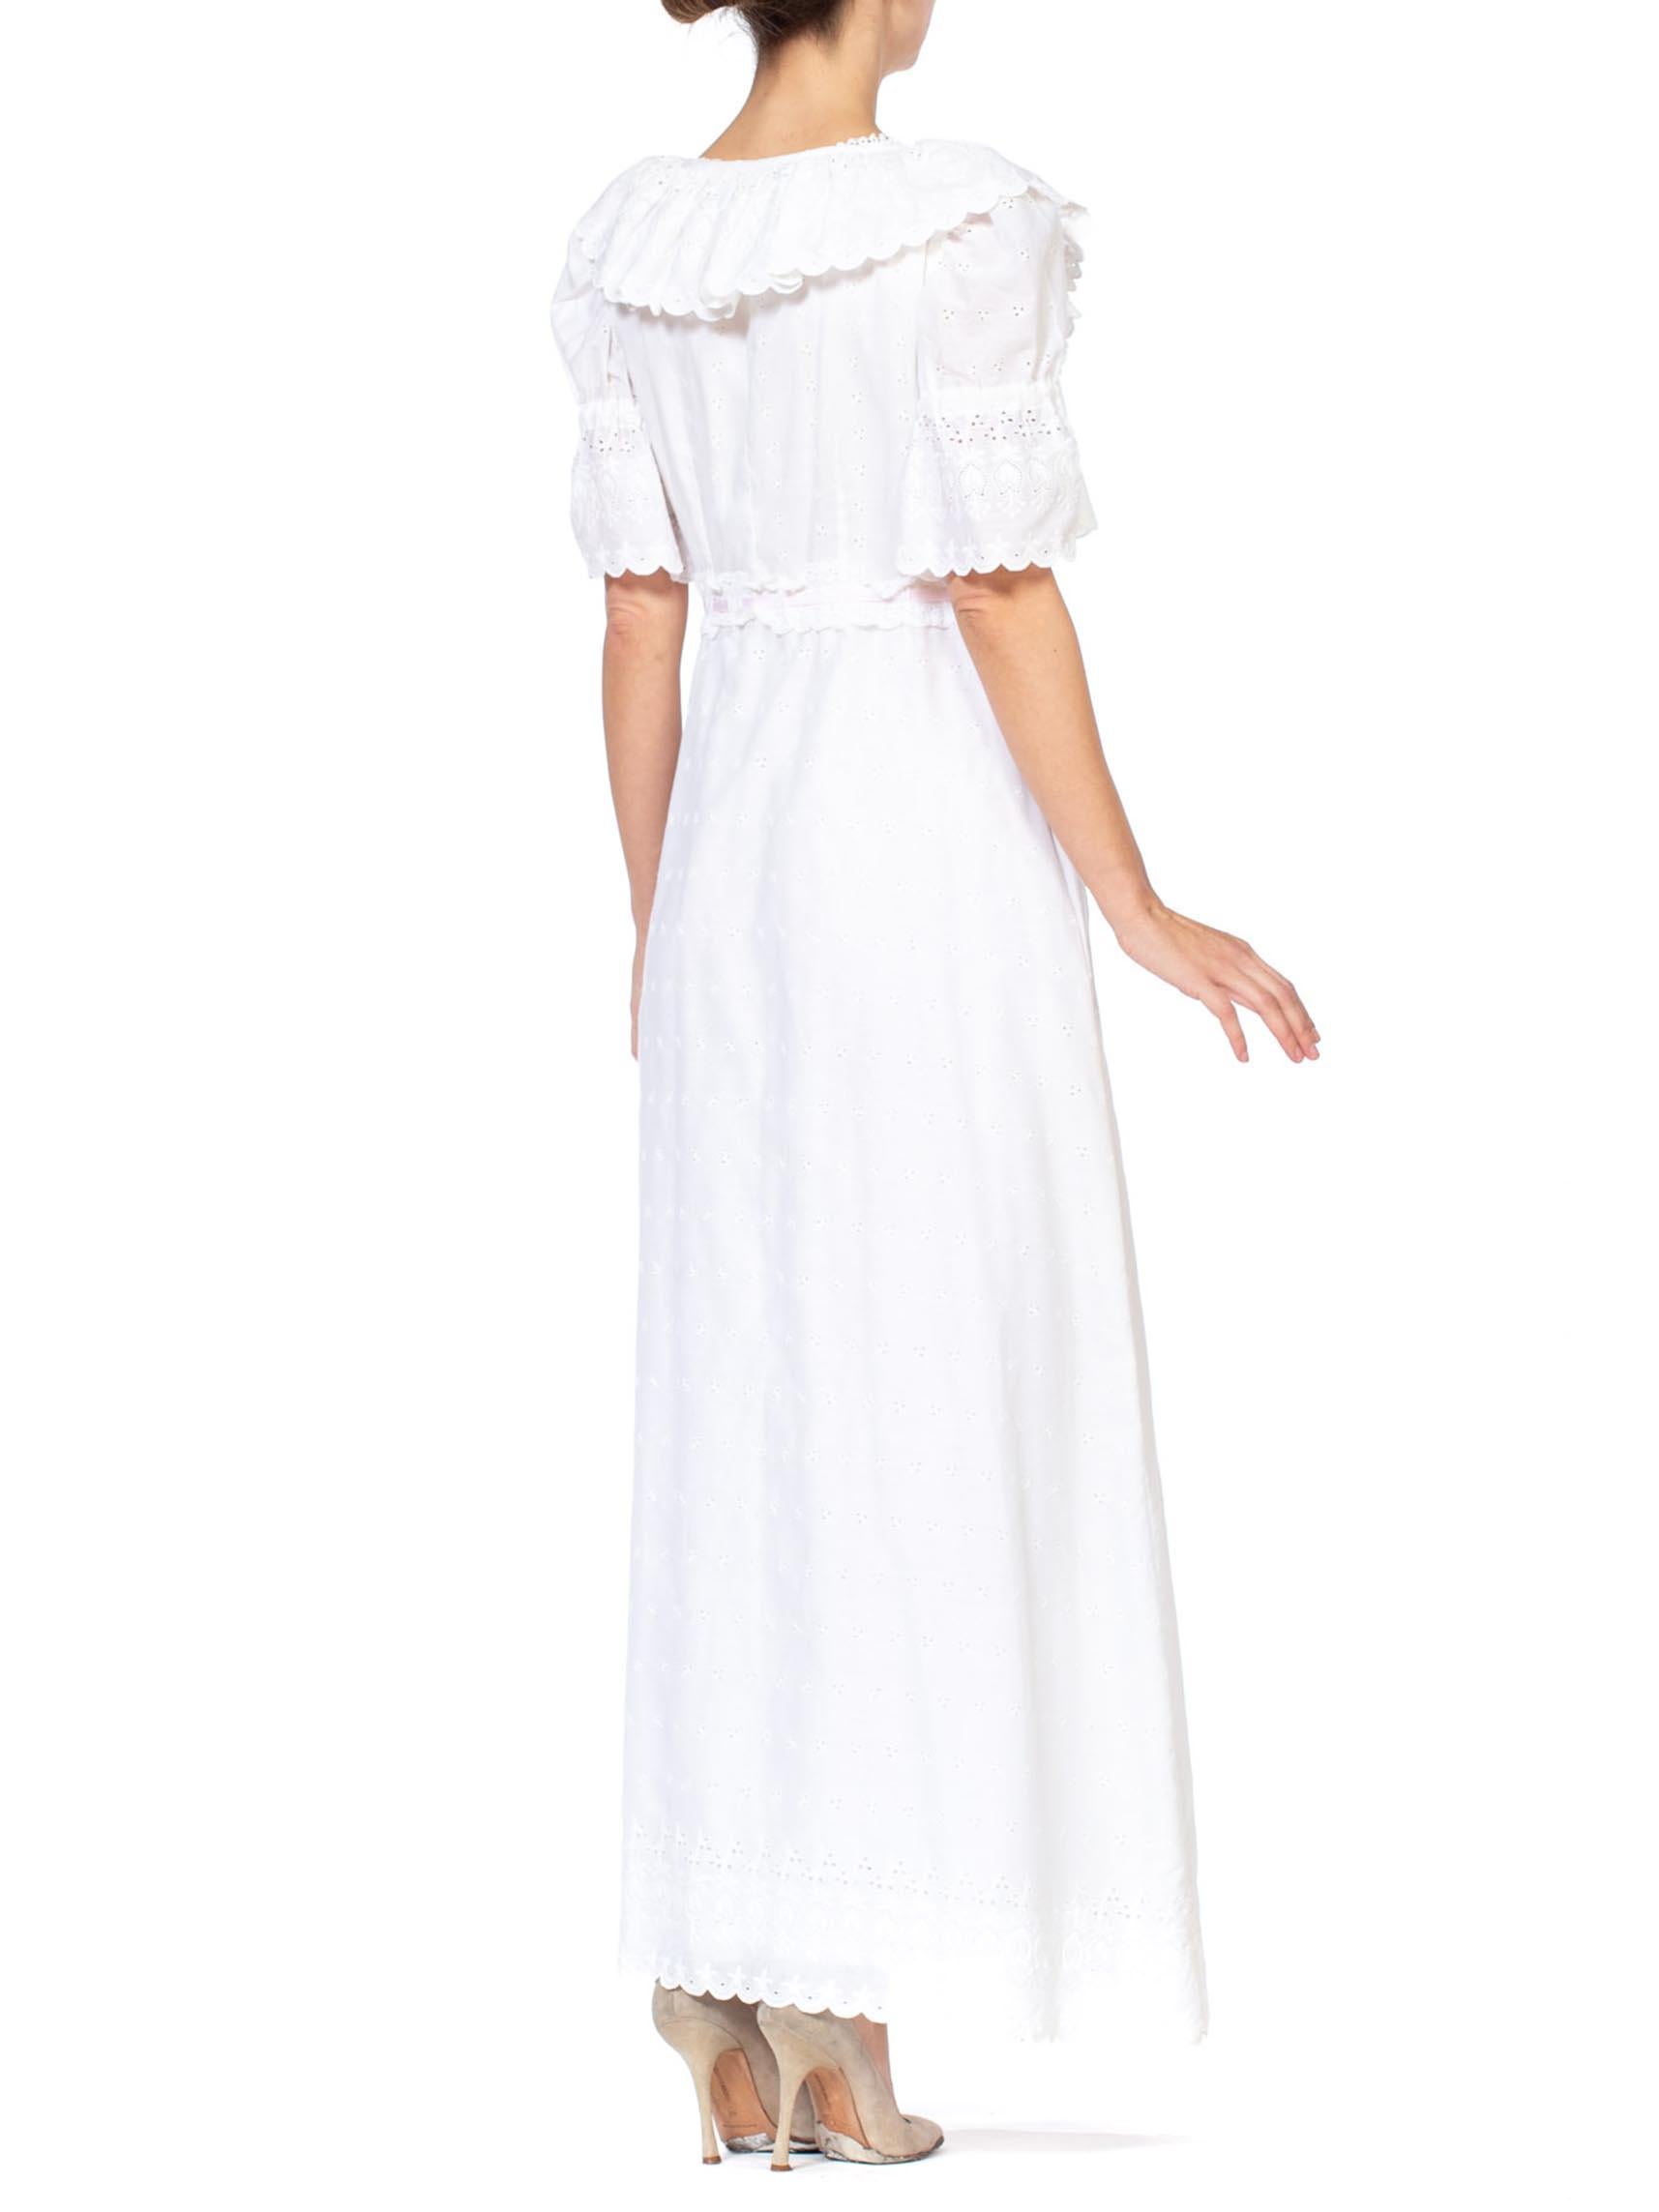 1970S White Embroidered Cotton Blend Eyelet Lace Negligee & Duster Robe Set For Sale 3